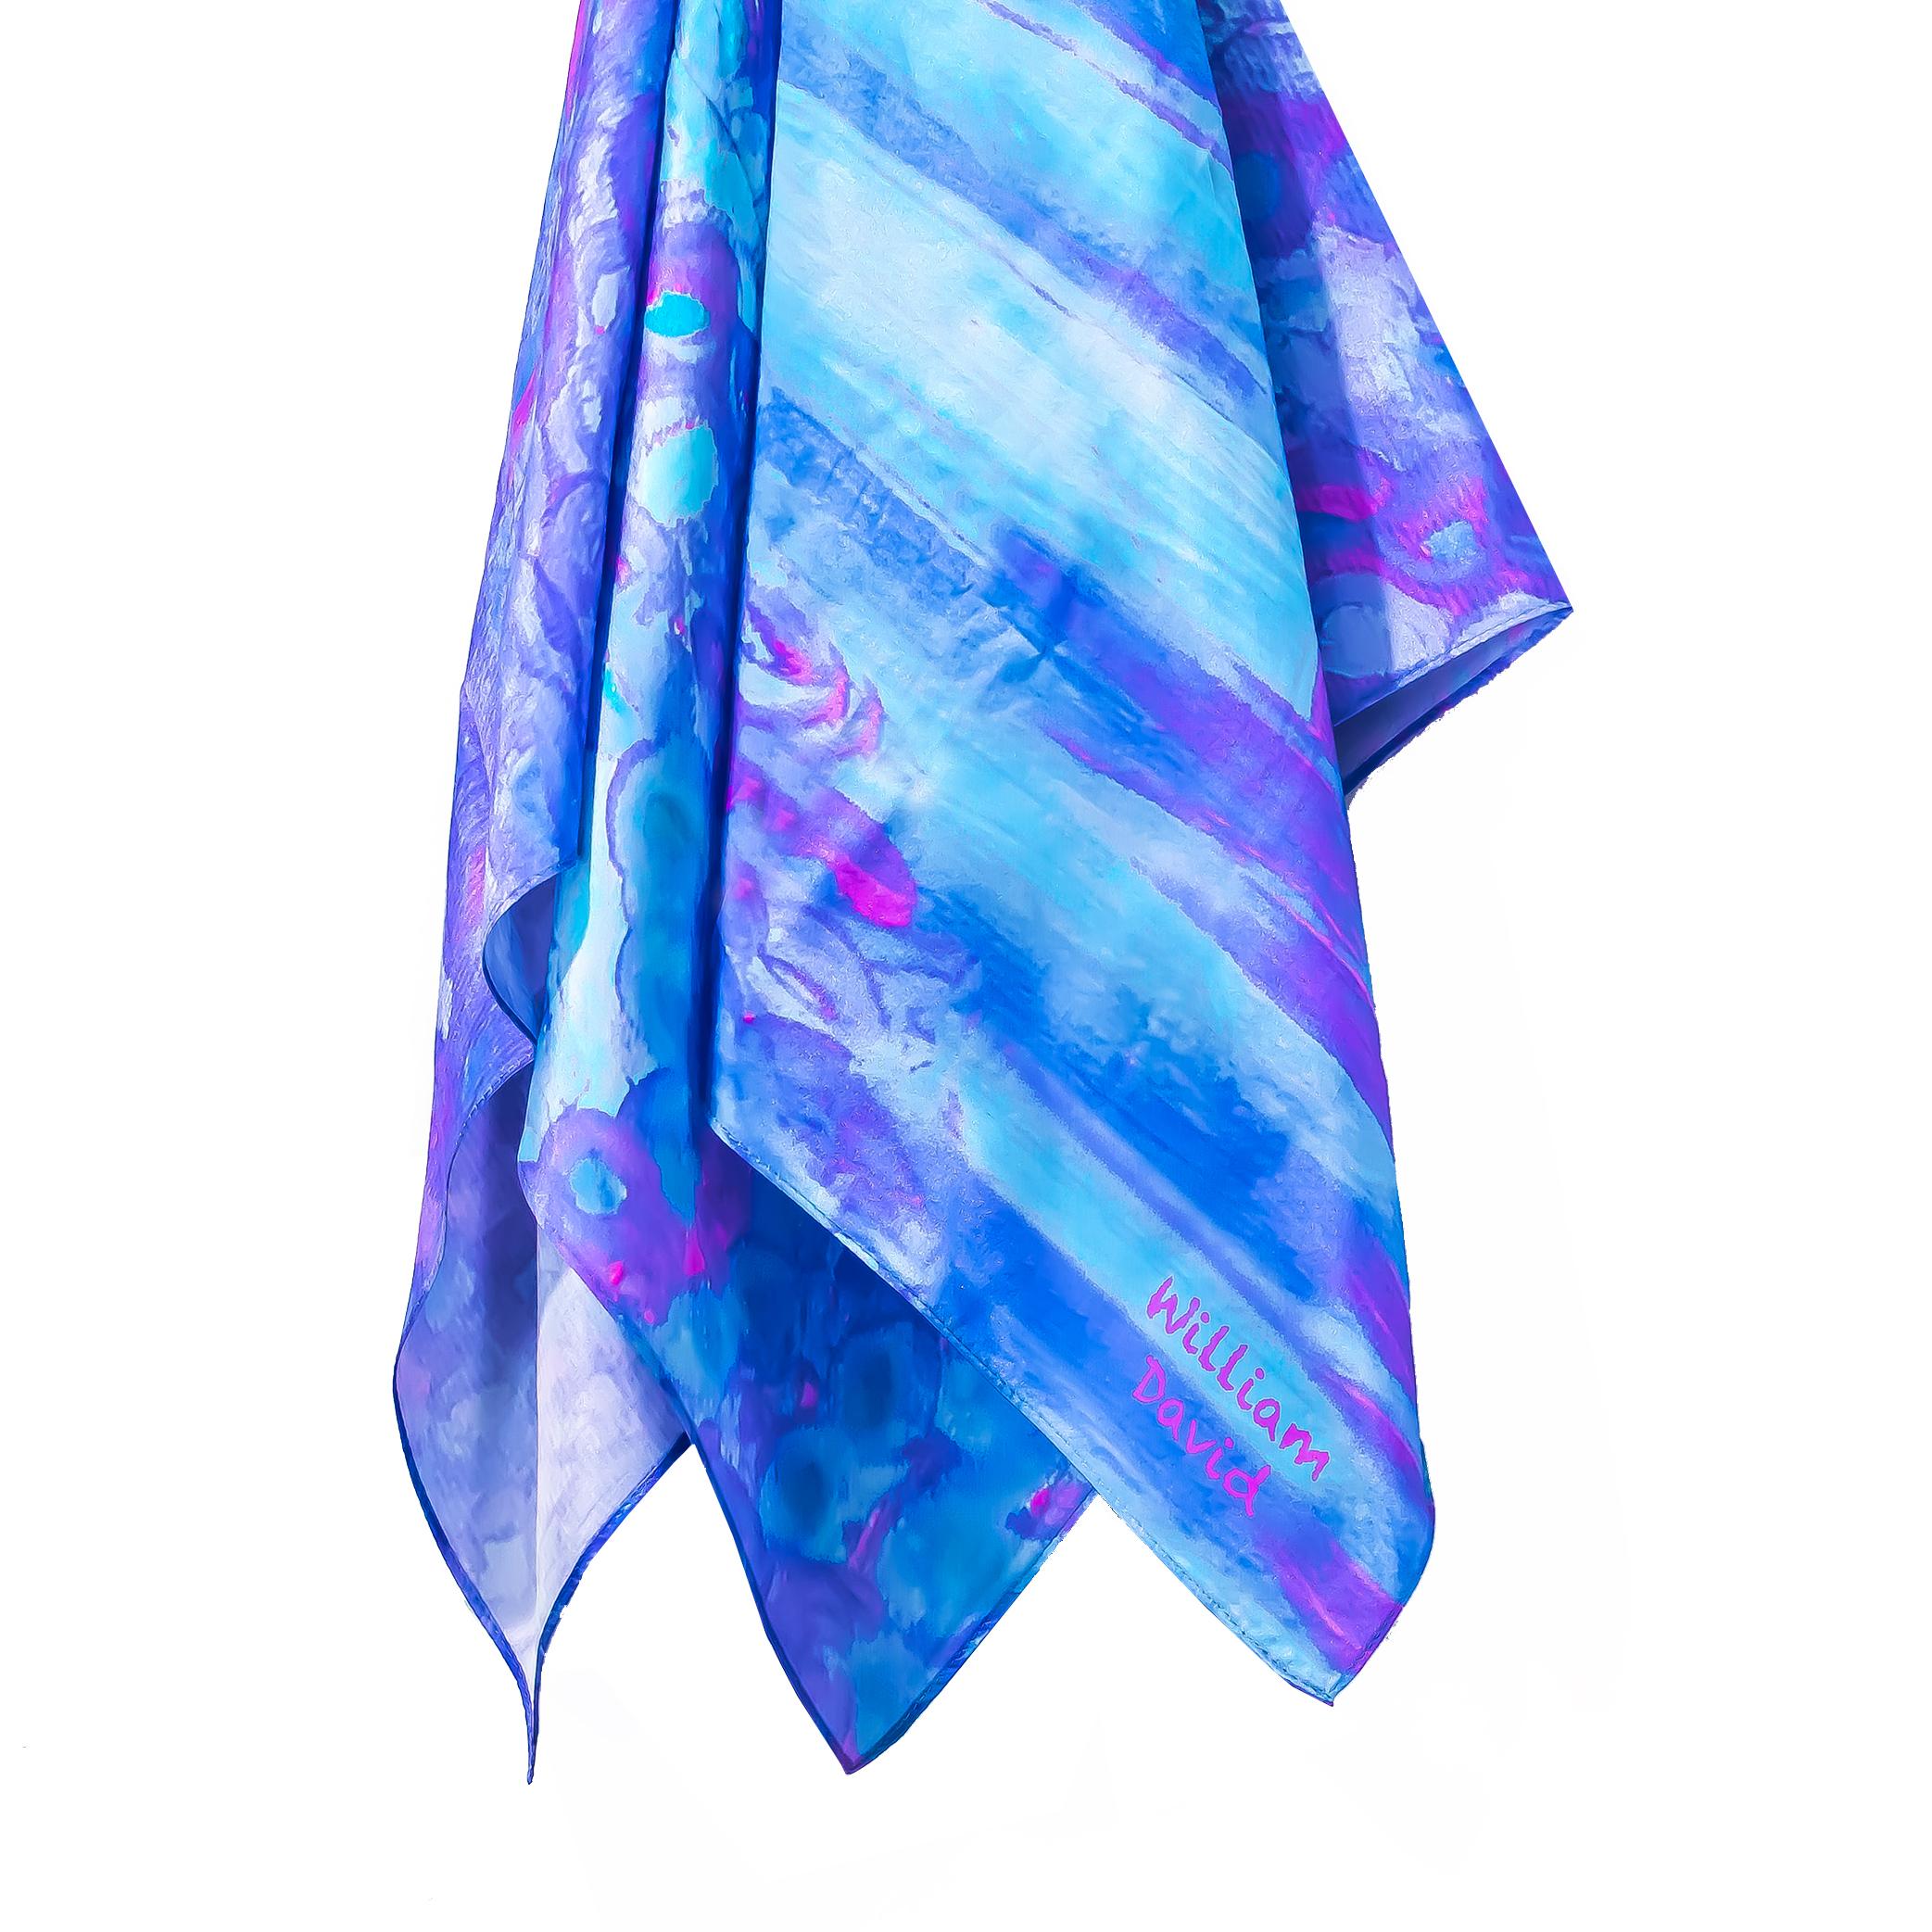 For the artistic, creative fashion lover, this oil painting-inspired silk scarf is the essential wardrobe staple. Diverse in color, and unique in pattern, this distinctive accessory is part of a collection of only 100 - each signed by William David